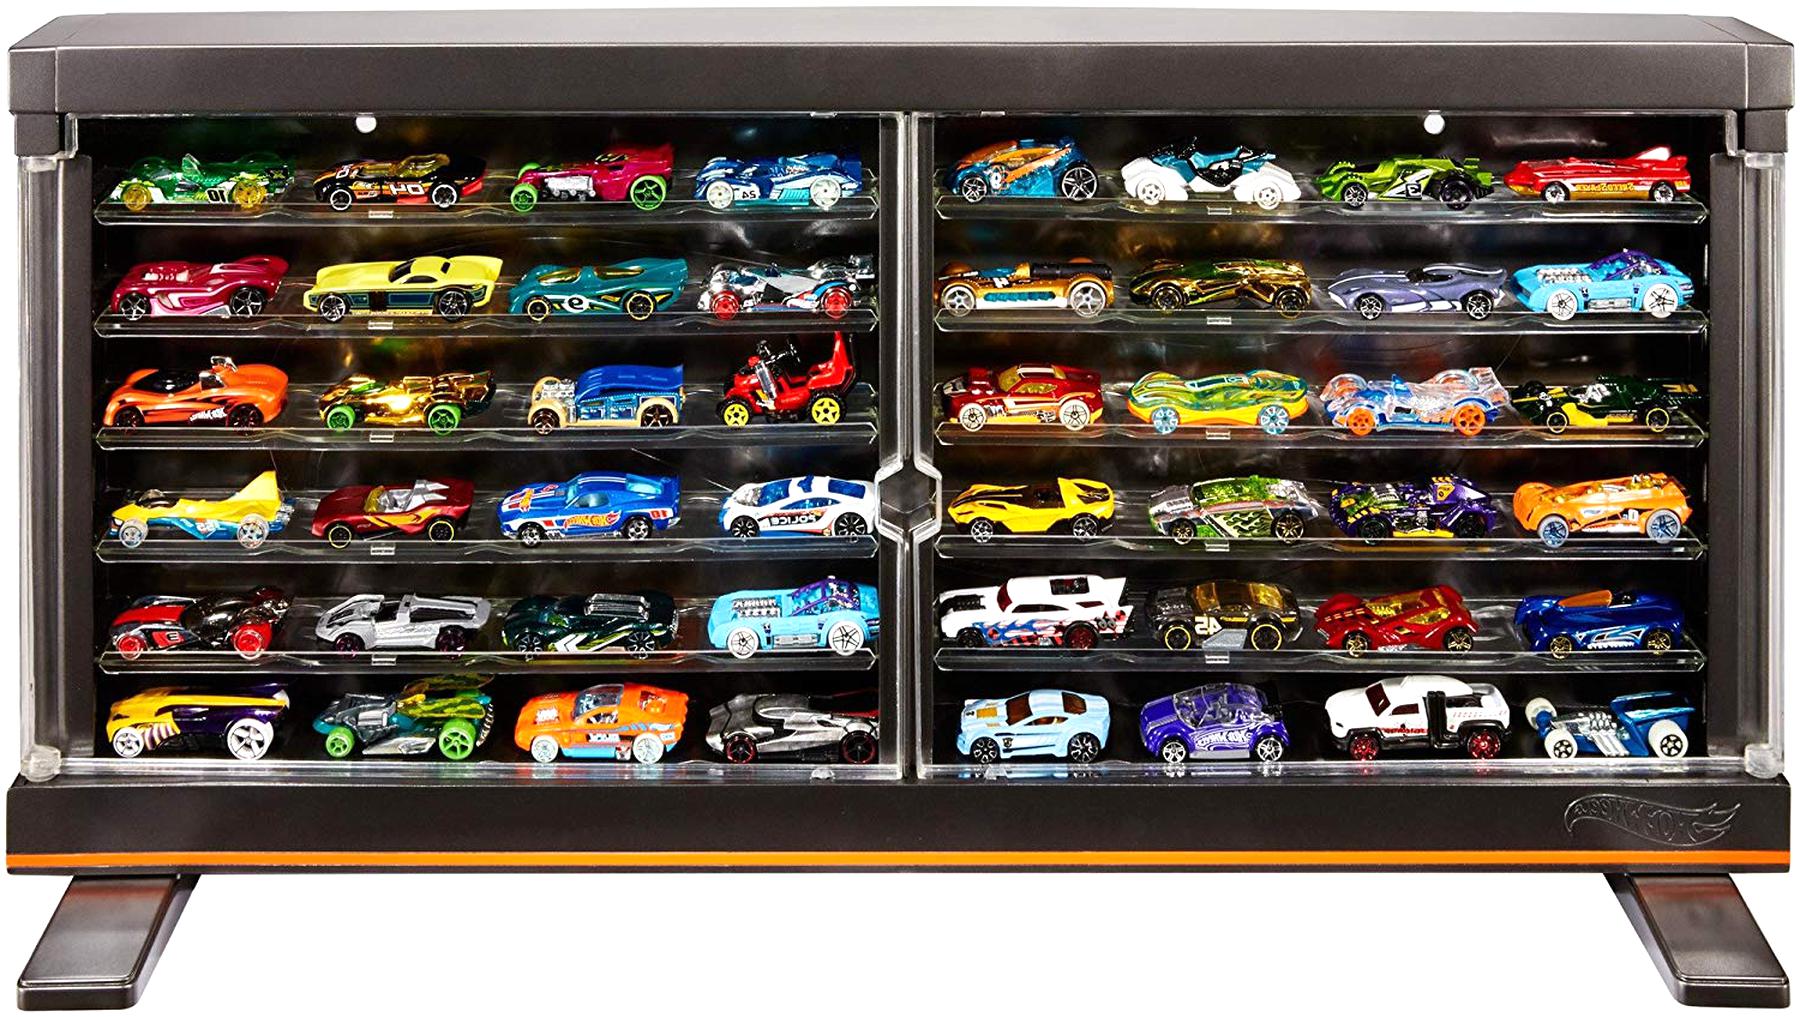 Hot Wheels Case for sale in UK | 72 used Hot Wheels Cases